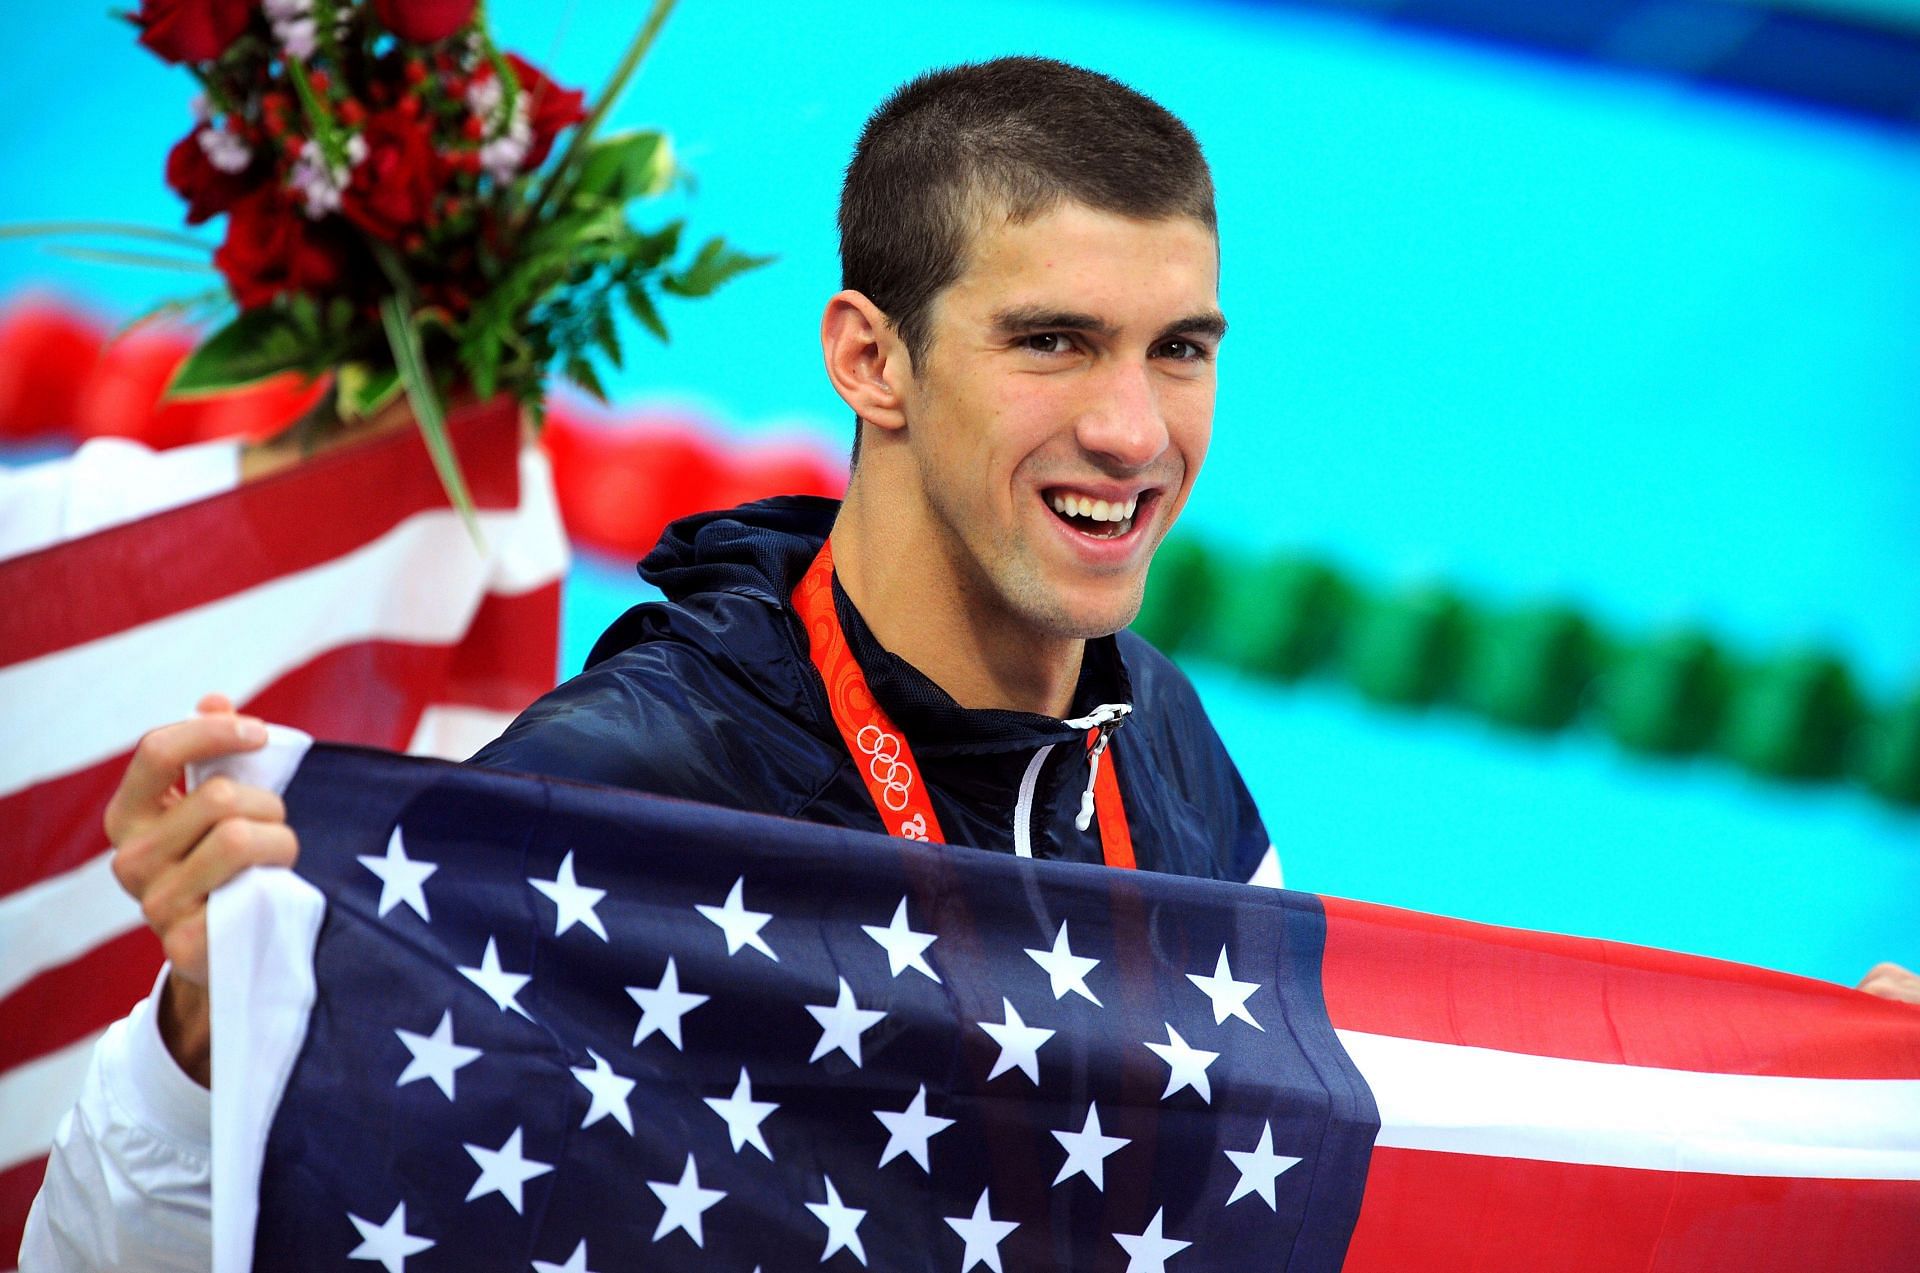 Phelps at the Beijing Olympics